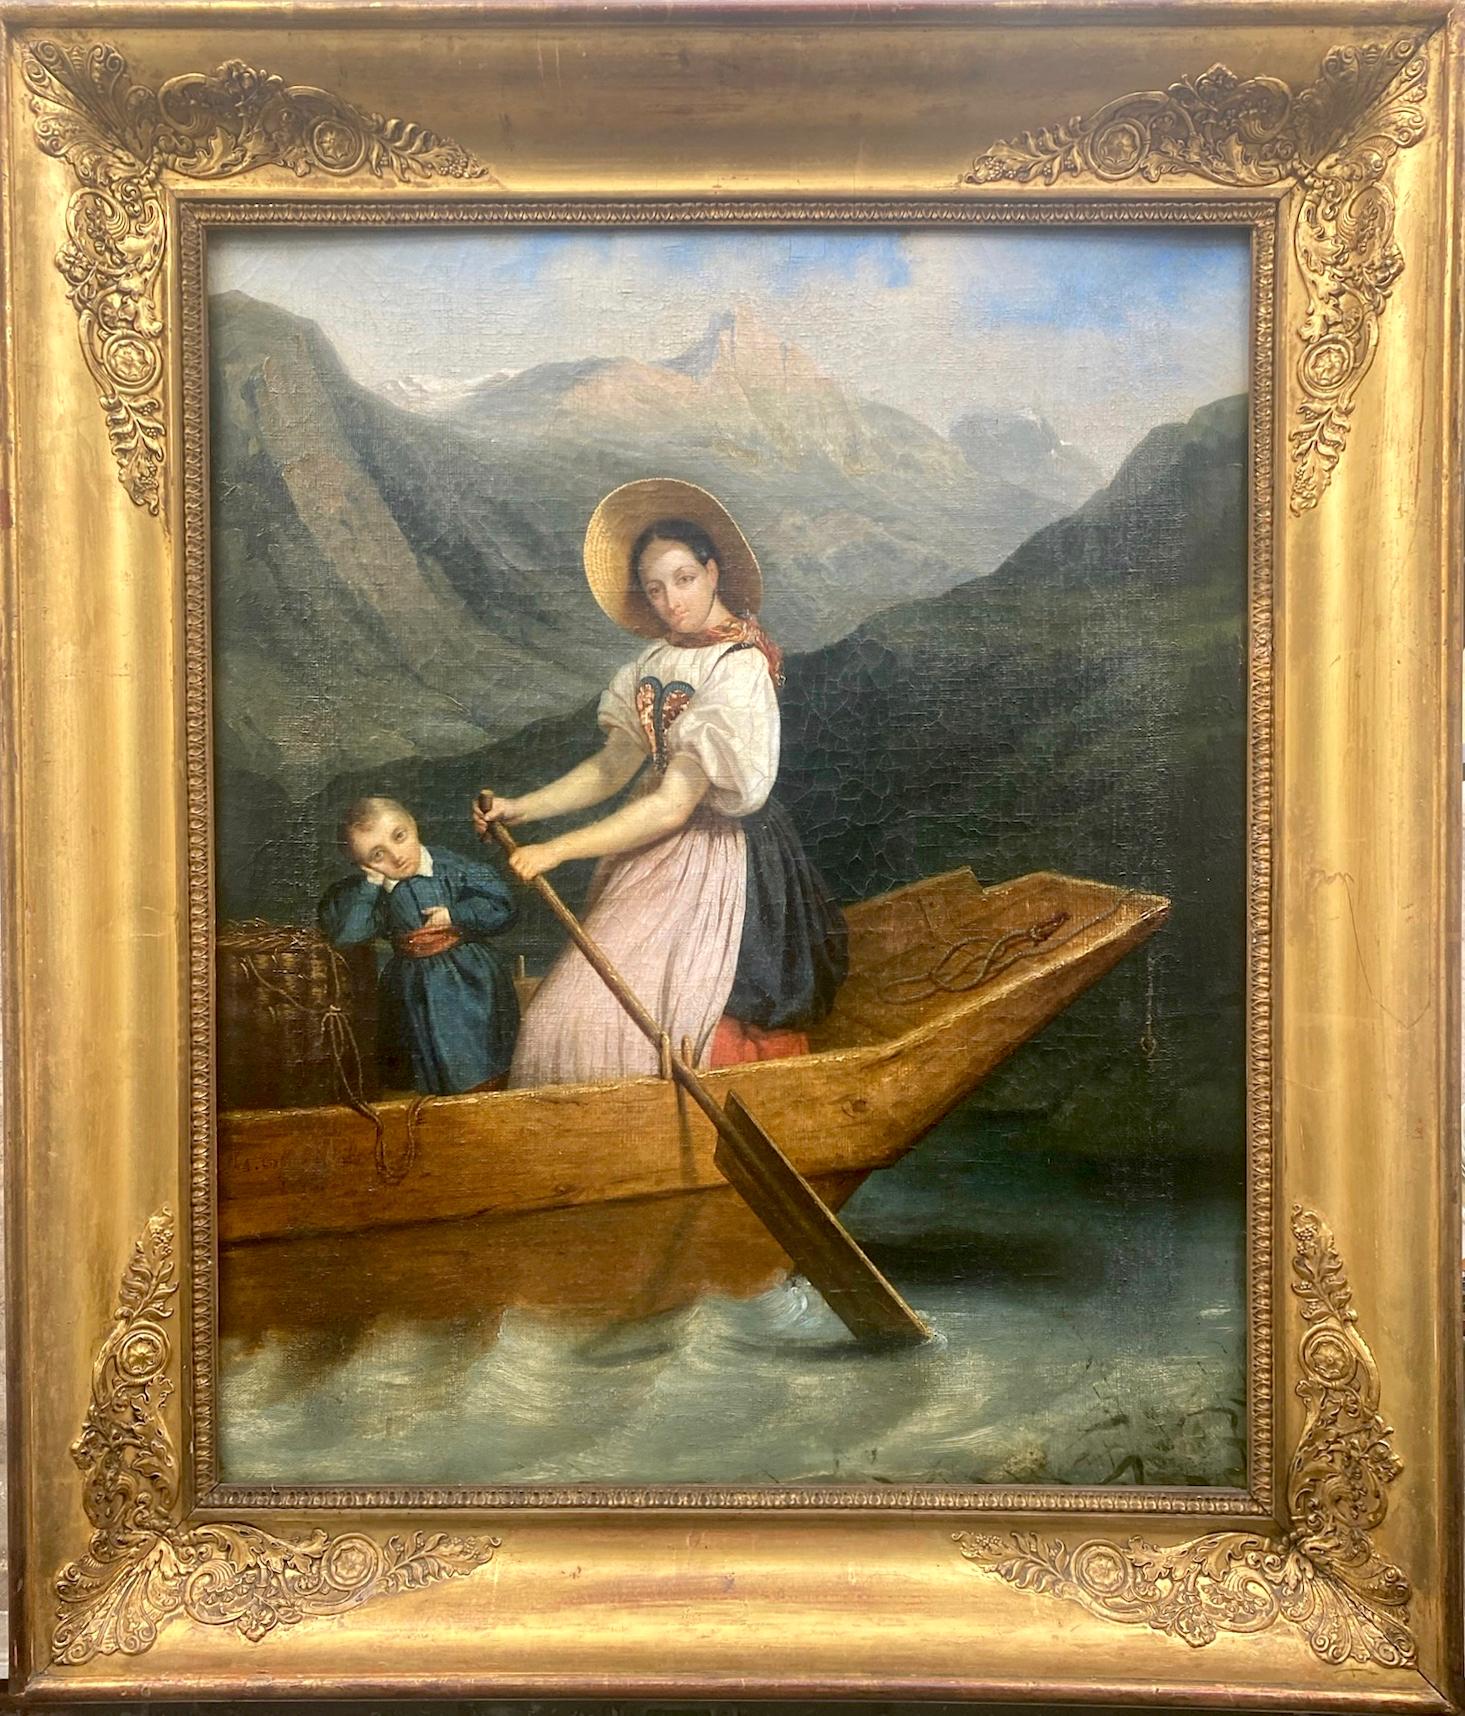 The Fair Skipper: boating on a mountain lake ca 1830 the Swiss Alps painting 